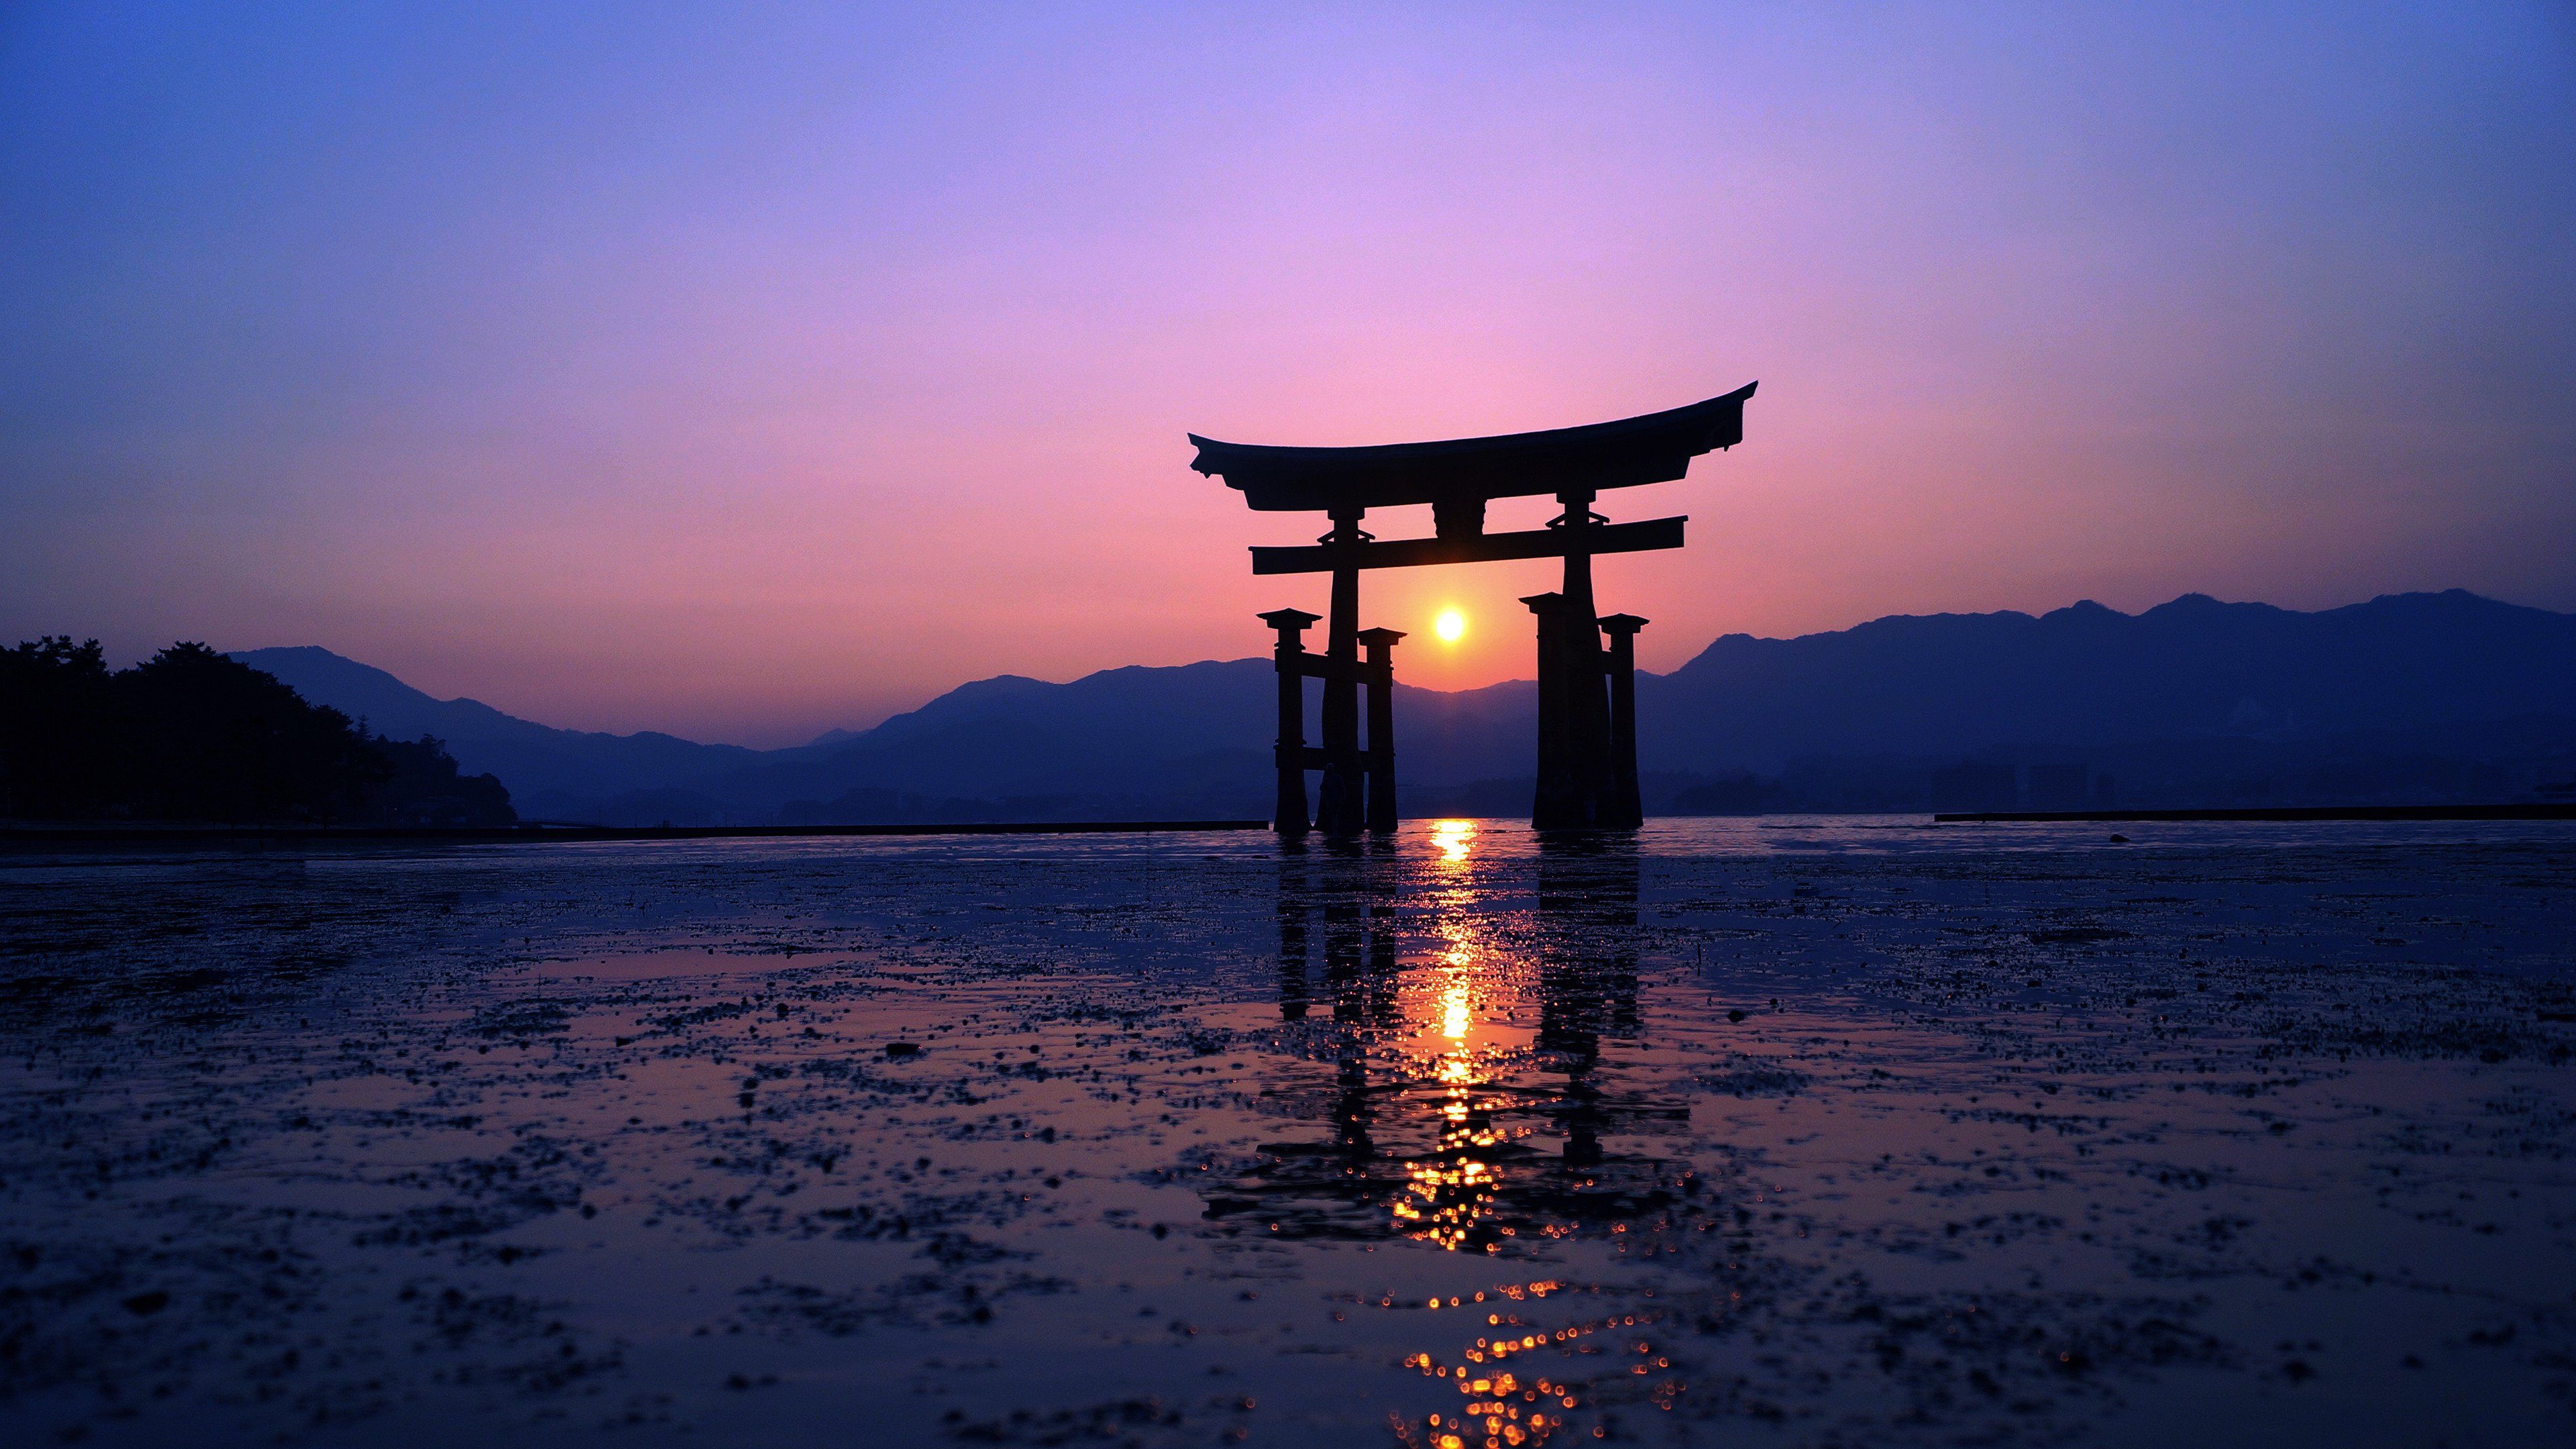 Torii 4K wallpaper for your desktop or mobile screen free and easy to download